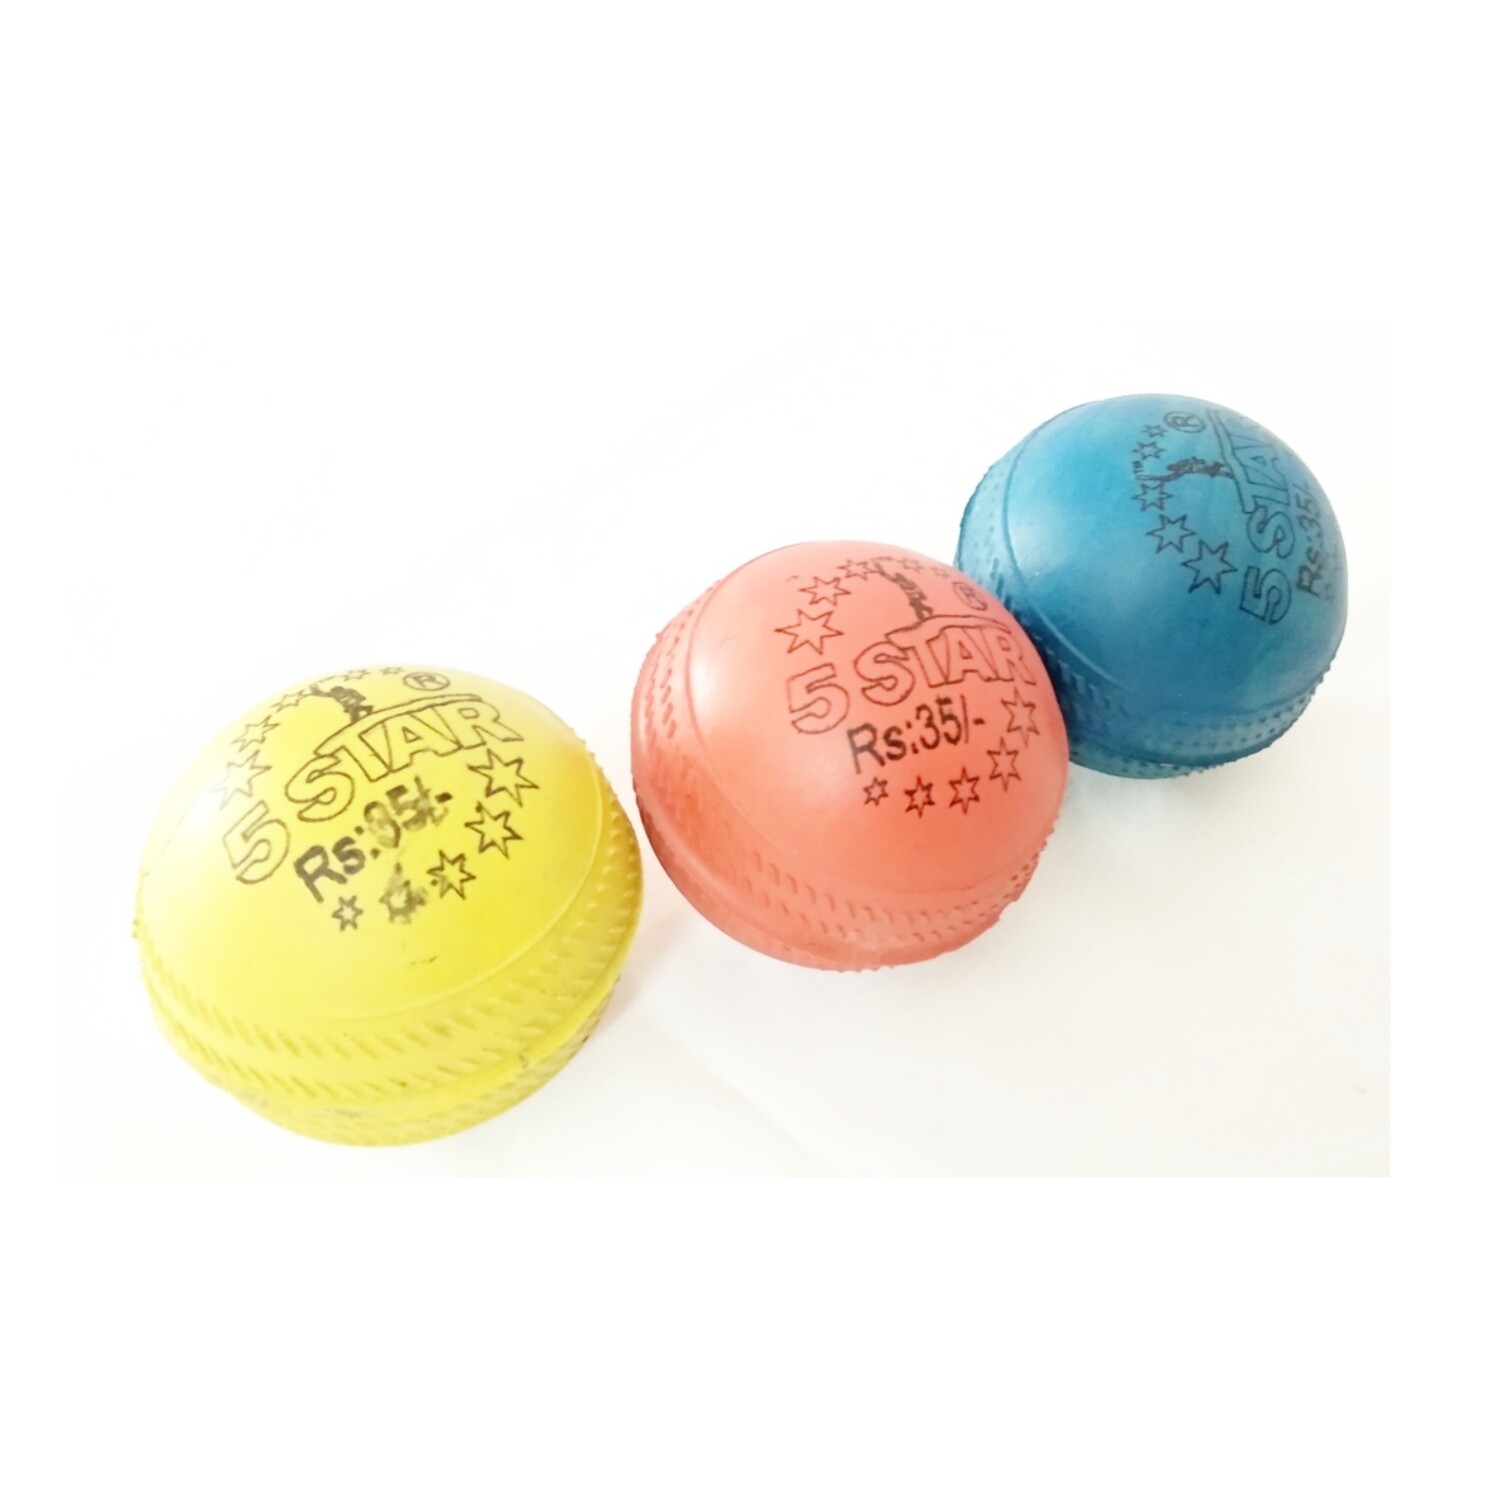 5 Star Soft Balls With Tough Grip Rubber Ball/Heavy Cricket Wind Ball (Multicolour) - Pack Of 4